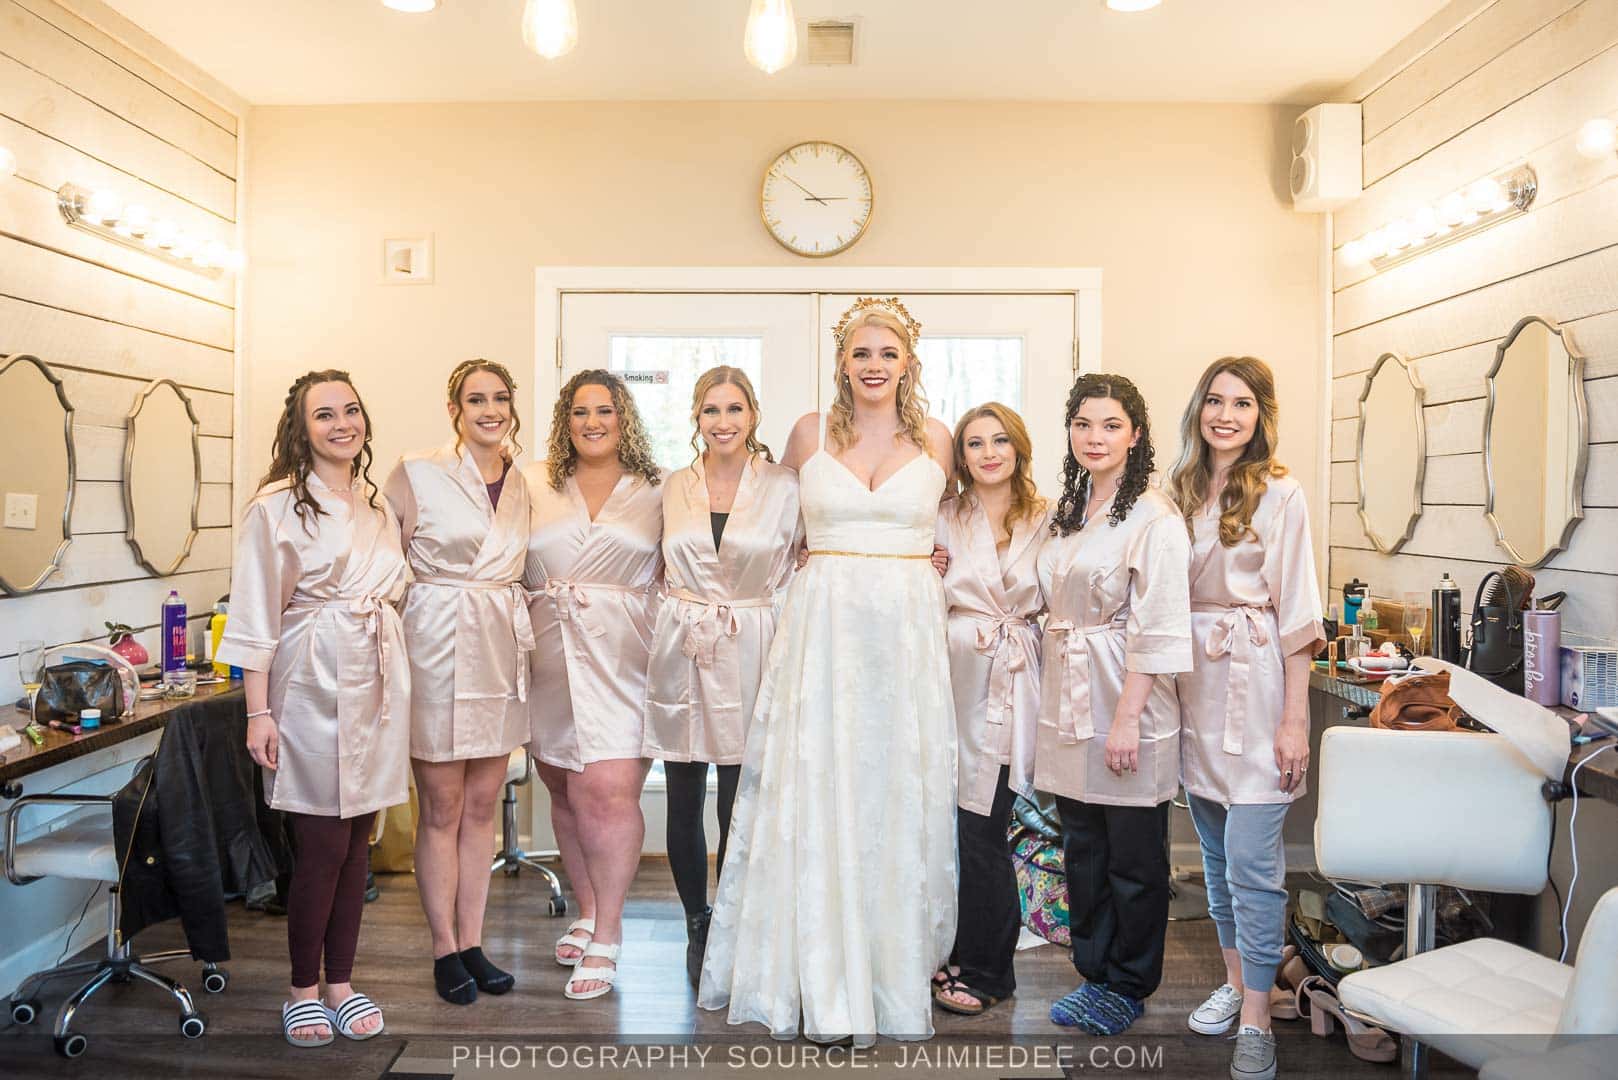 Rocky's Lake Estate Wedding Venue - getting ready in the bridal suite - group photo with bride and bridesmaids in bride's suite